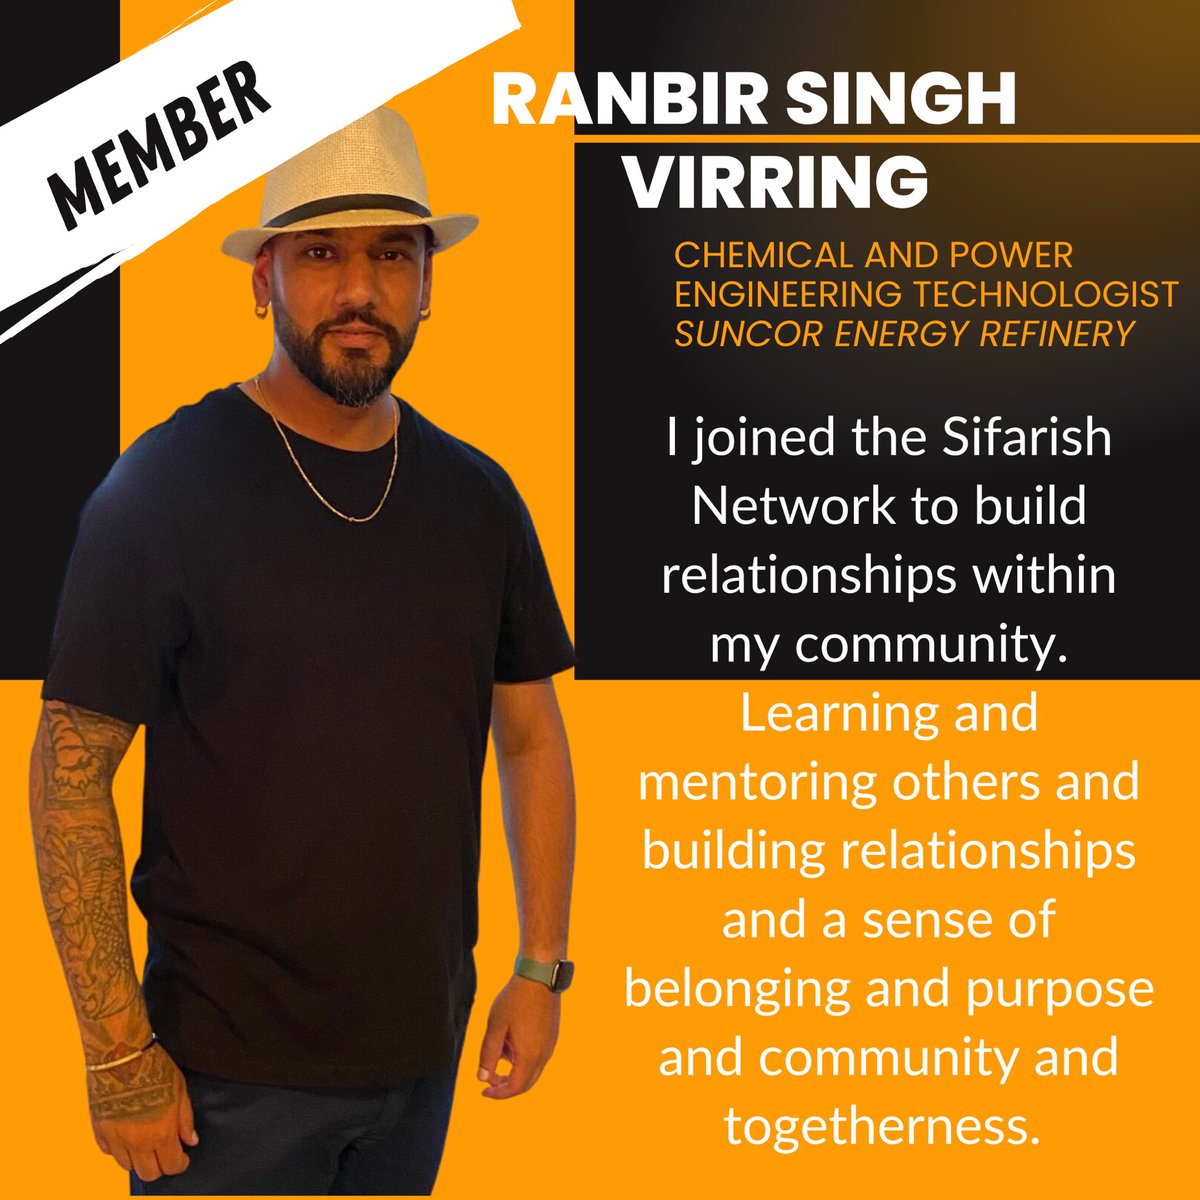 Welcome to this week’s #MembershipMonday ! This week, we feature Ranbir Singh Virring!

#collaboration #support #southasian #business #professional #growth #yeg #yyc #yvr #canada #success #chemicalengineering #powerengineering #suncor #energy #technologist